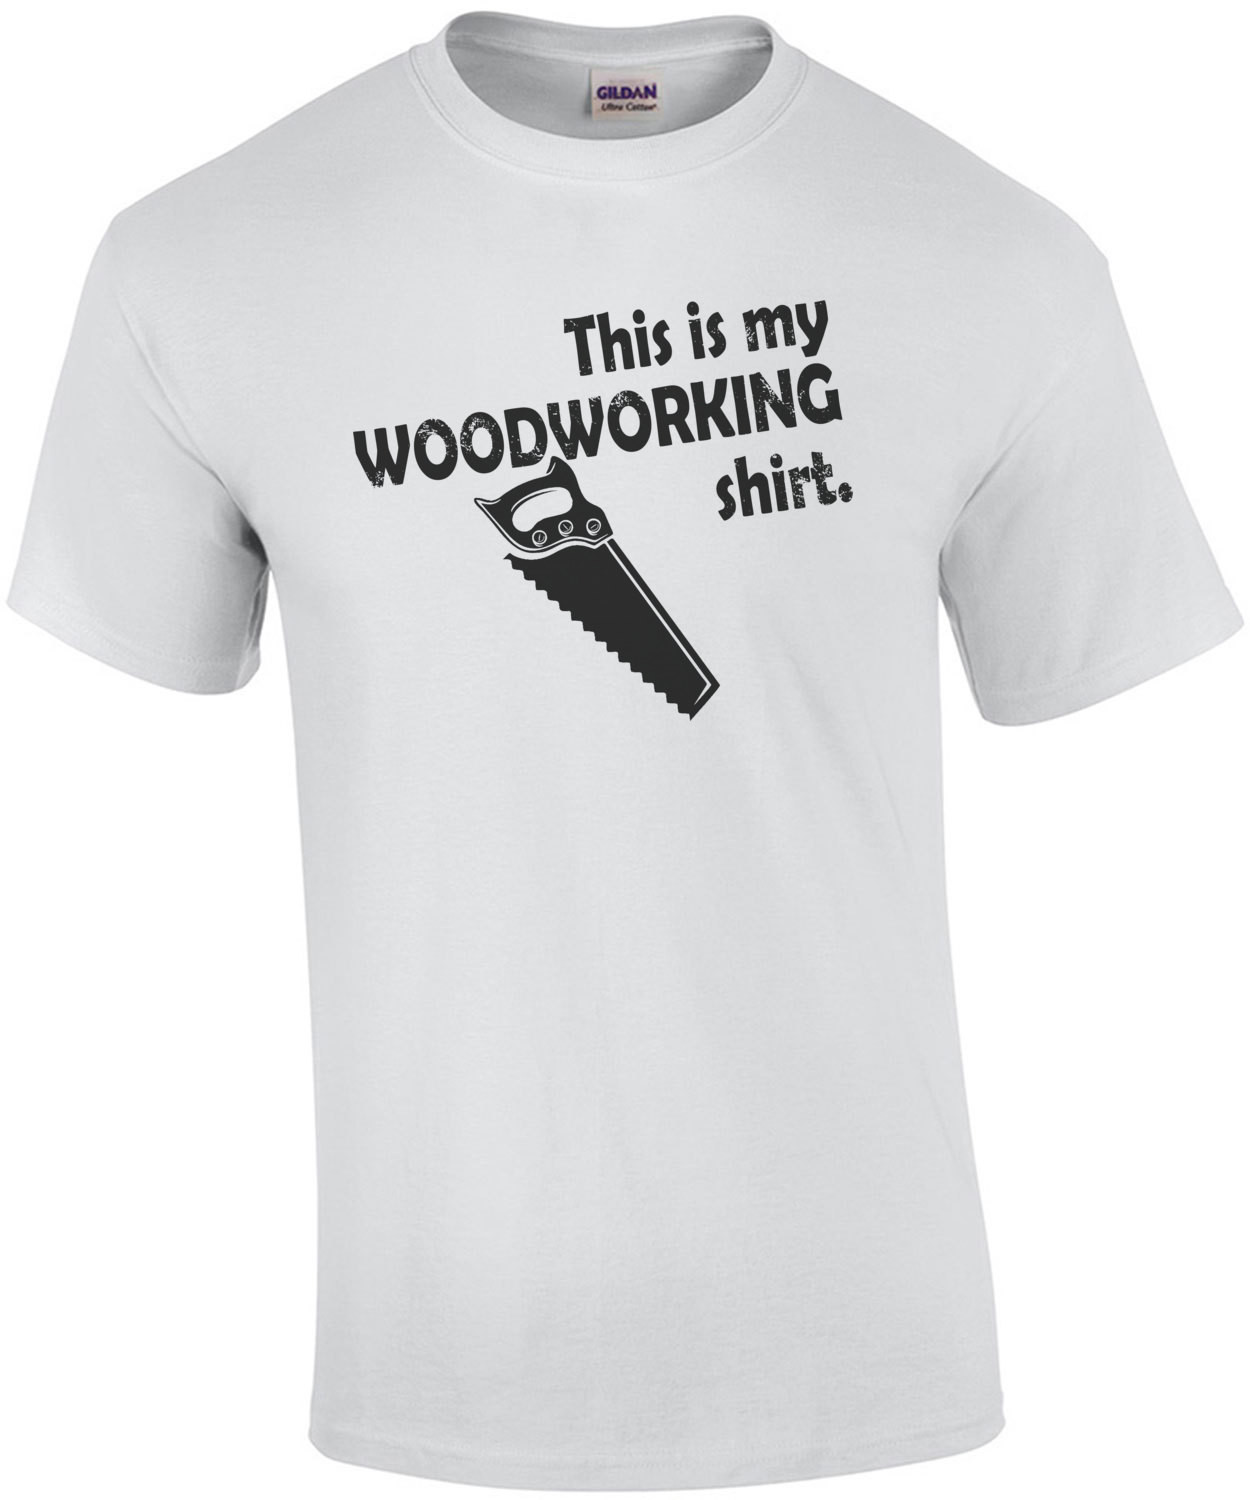 This Is My Woodworking Shirt T-Shirt